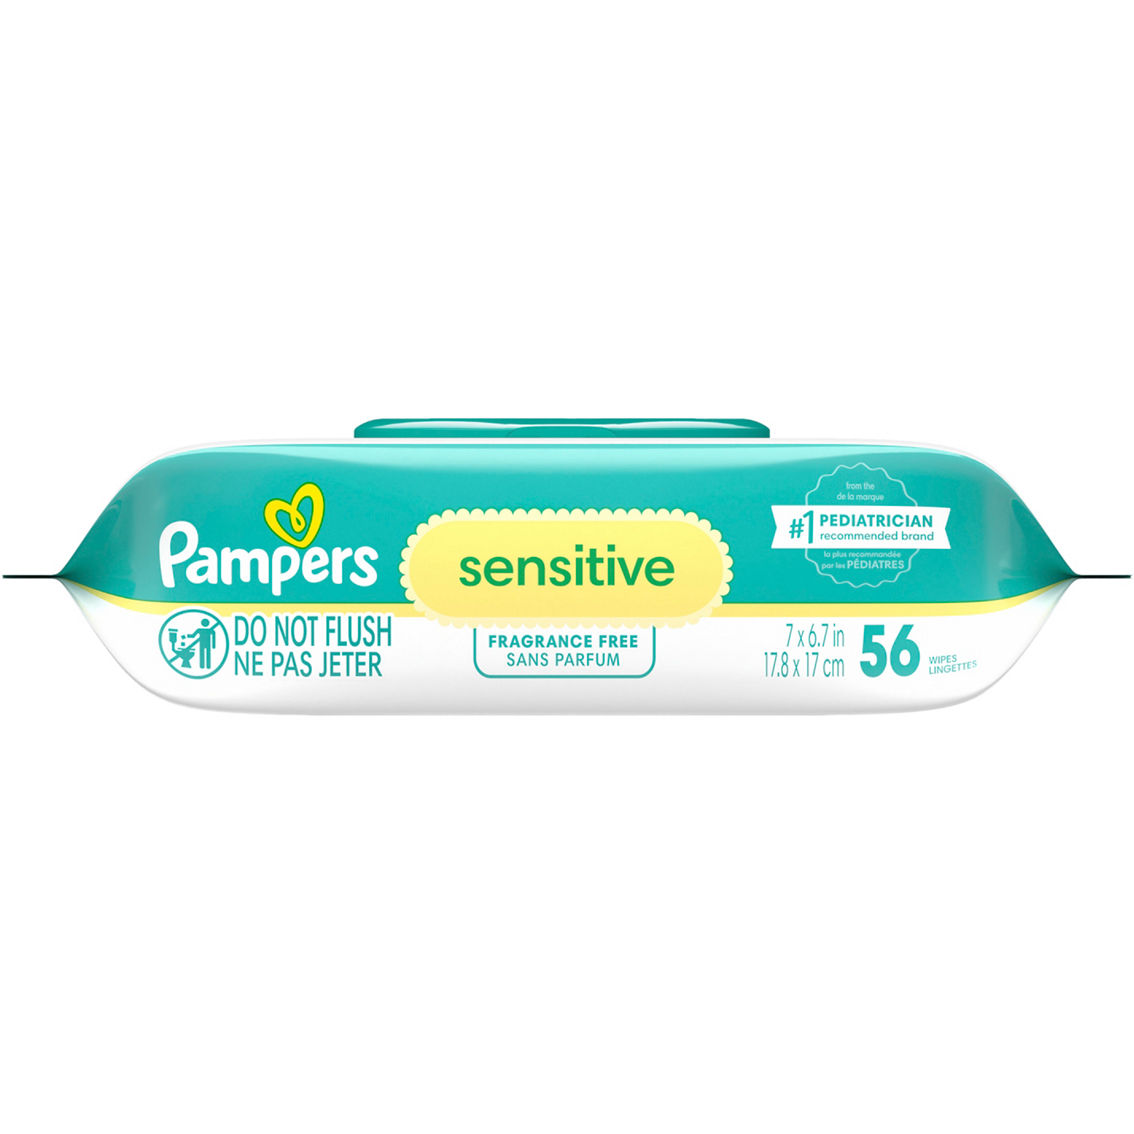 Pampers Sensitive Baby Wipes - Image 1 of 2